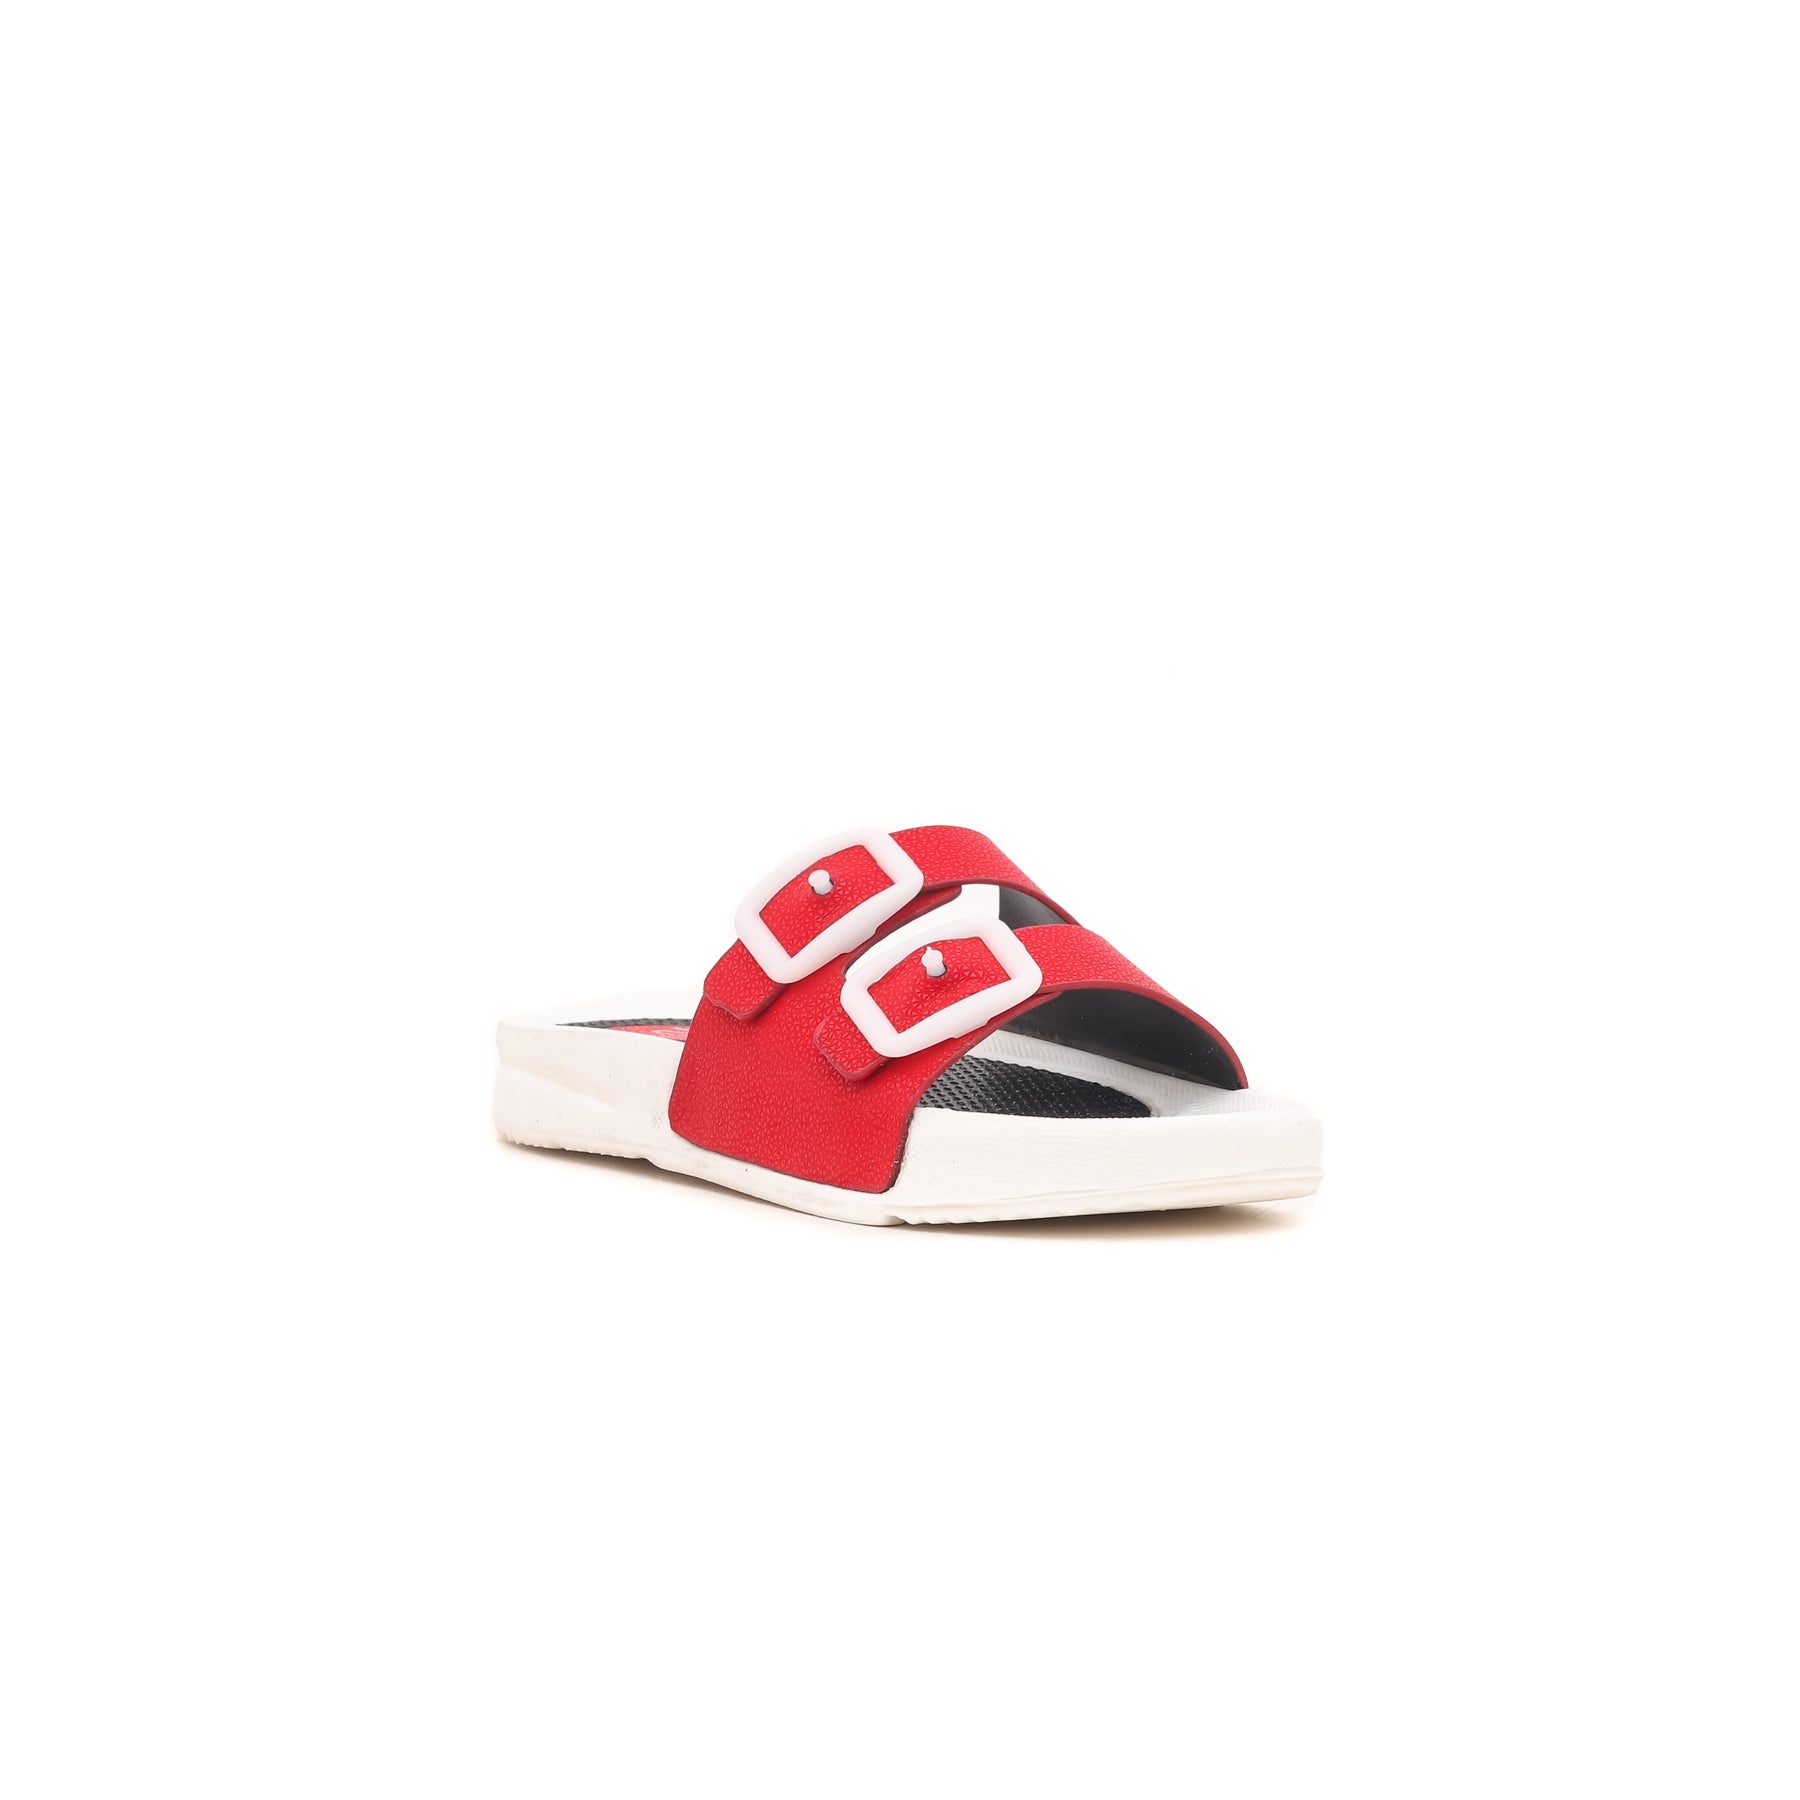 Boys Red Casual Flip Flop KD5160